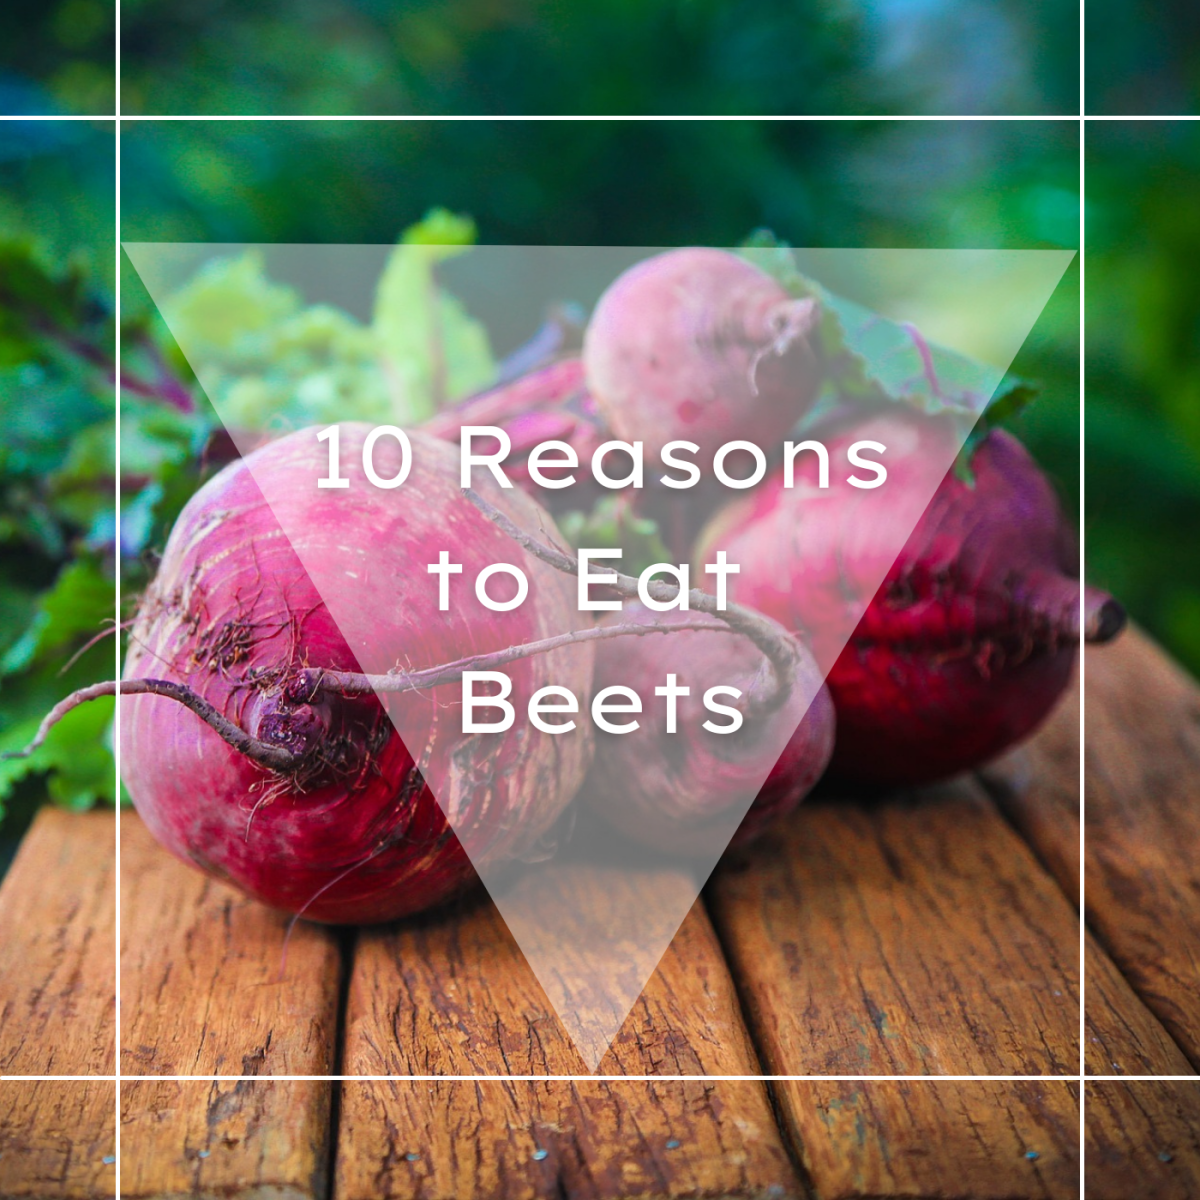 10 Reasons to Eat Beets